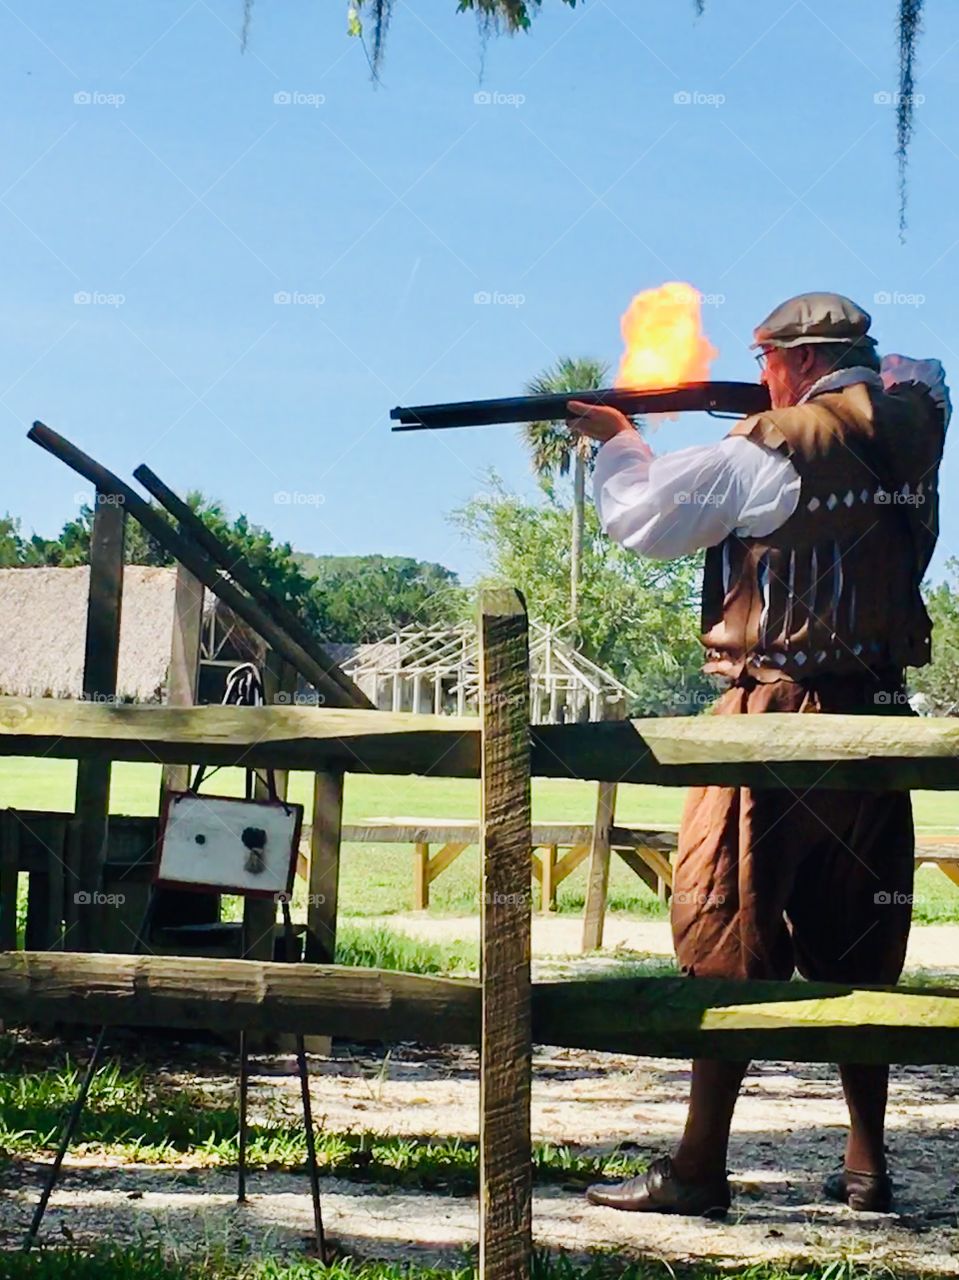 Black powder demo at Fountain of Youth in Florida 